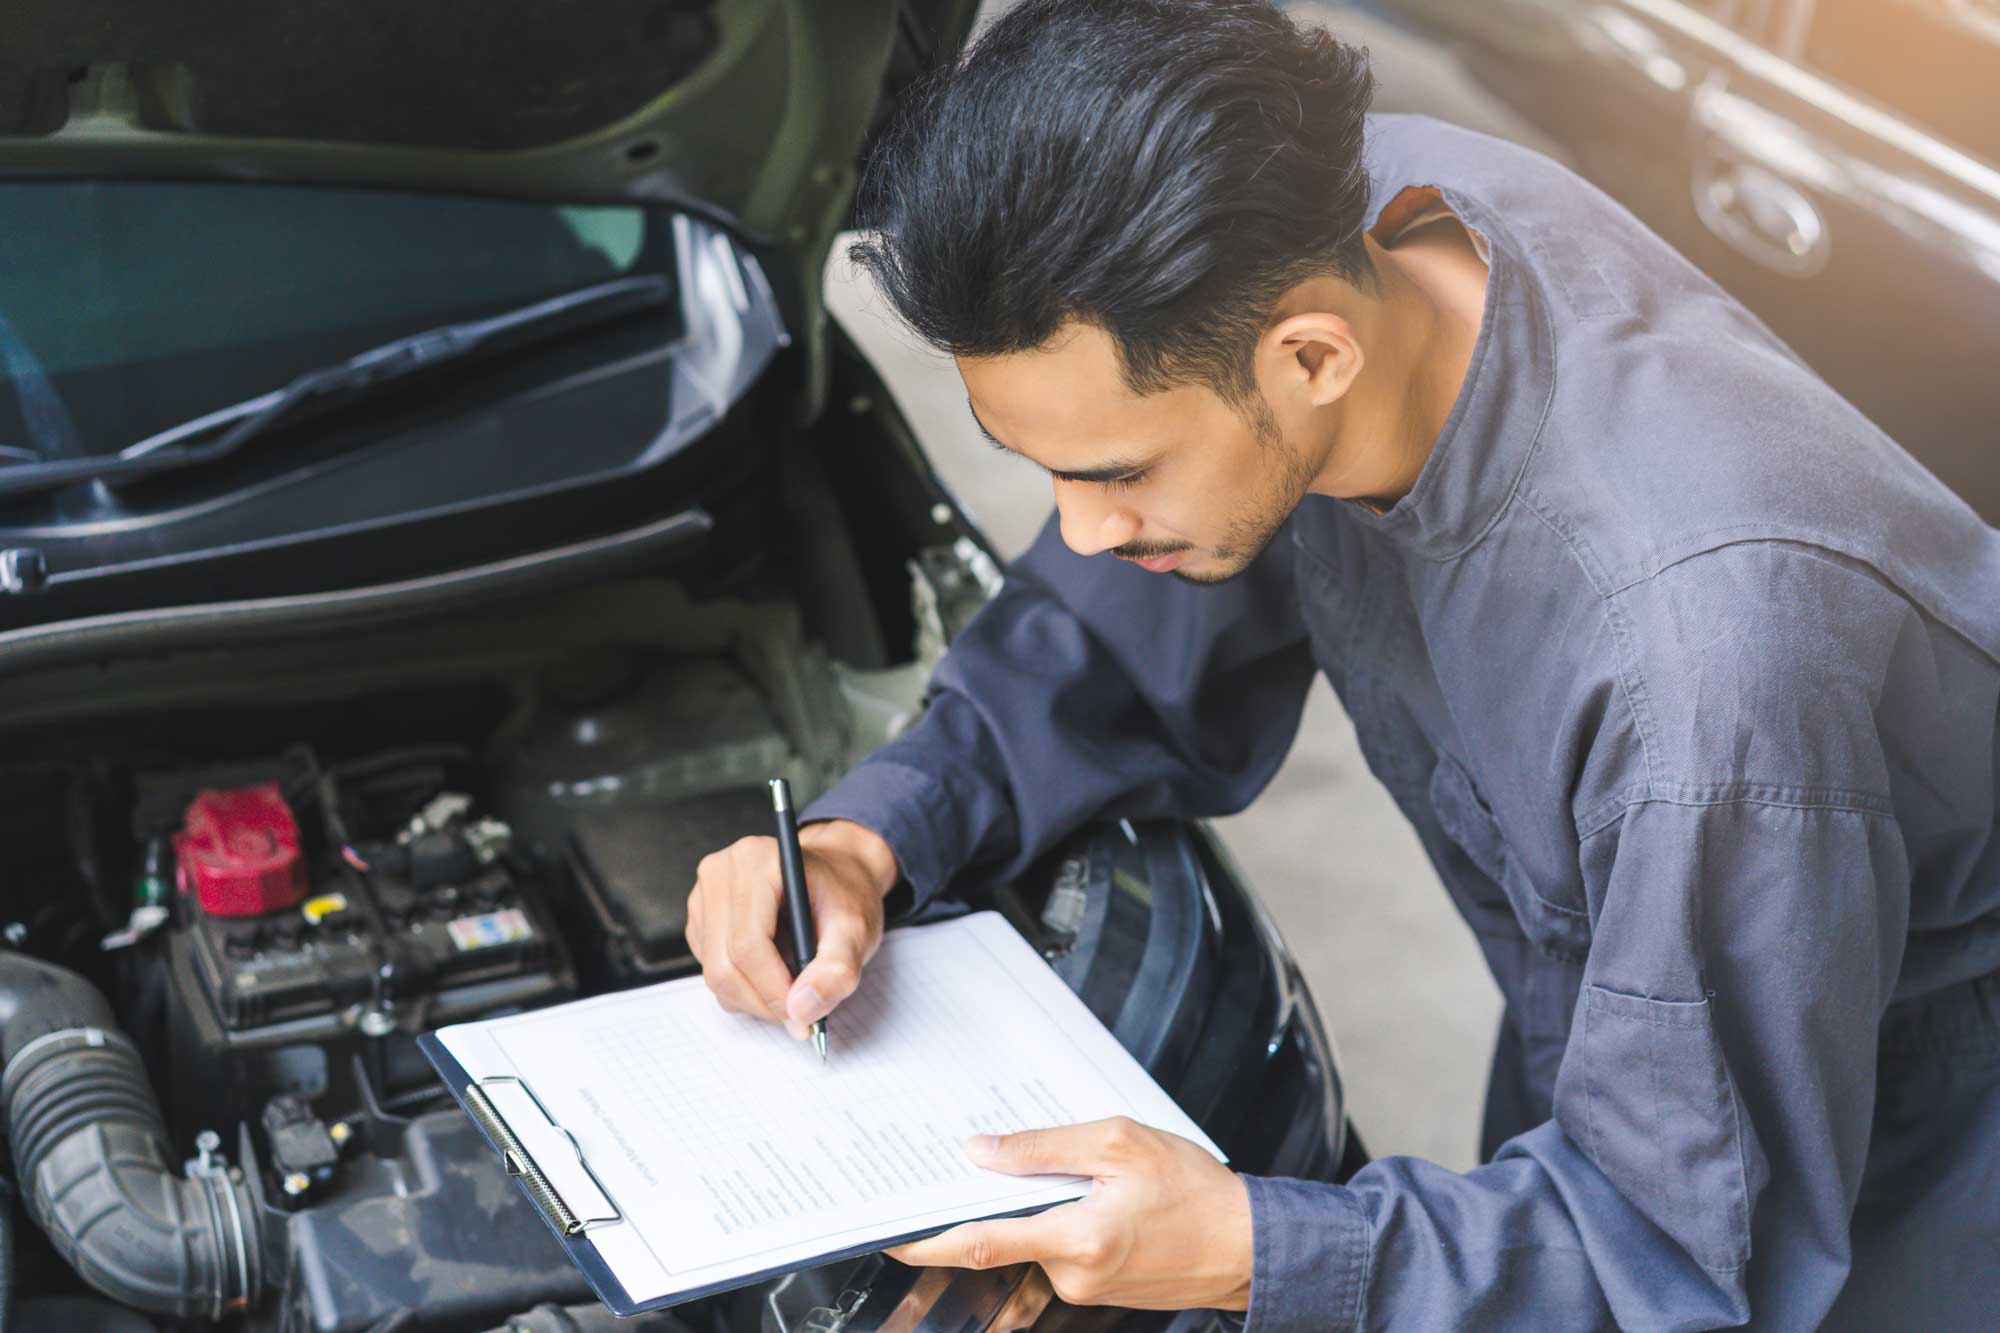 Mechanic filling out paperwork for vehicle